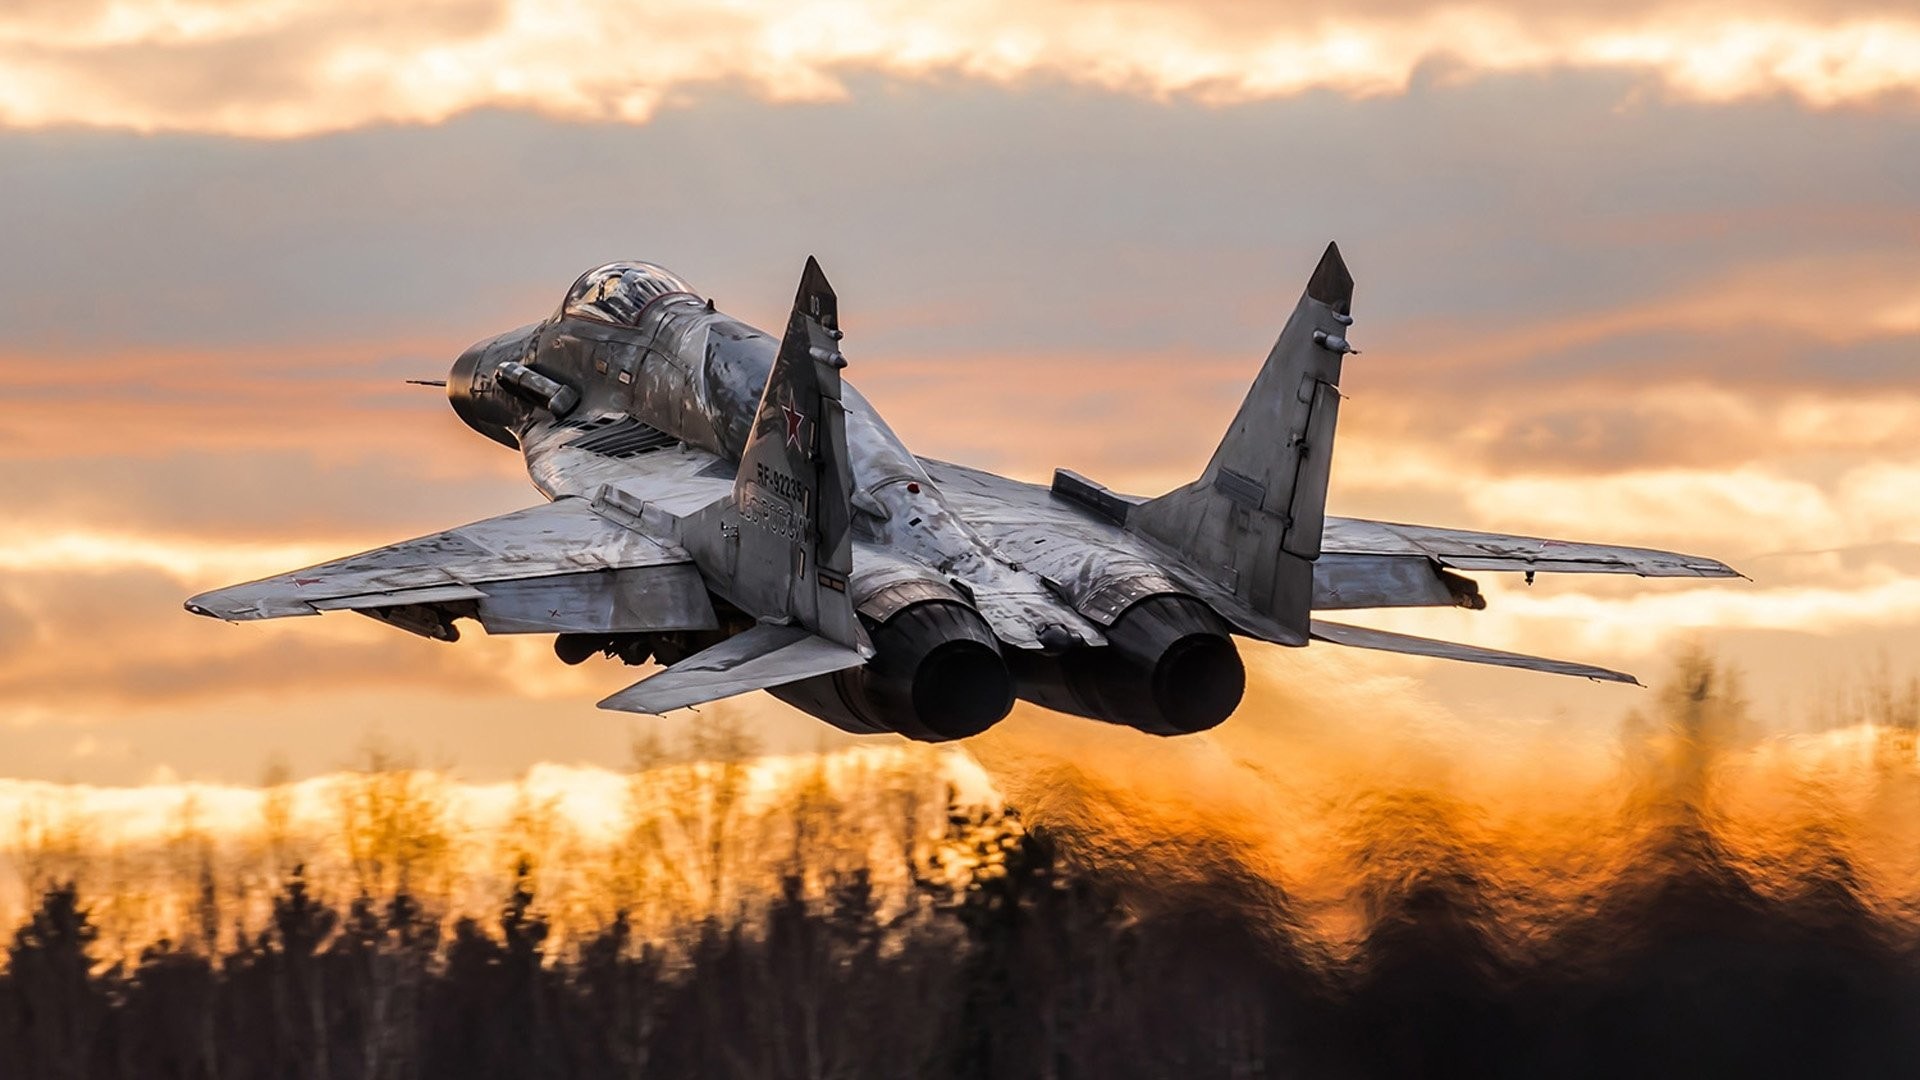 1920x1080 Mikoyan MiG-29 Jet Fighter Aircraft Wallpapers